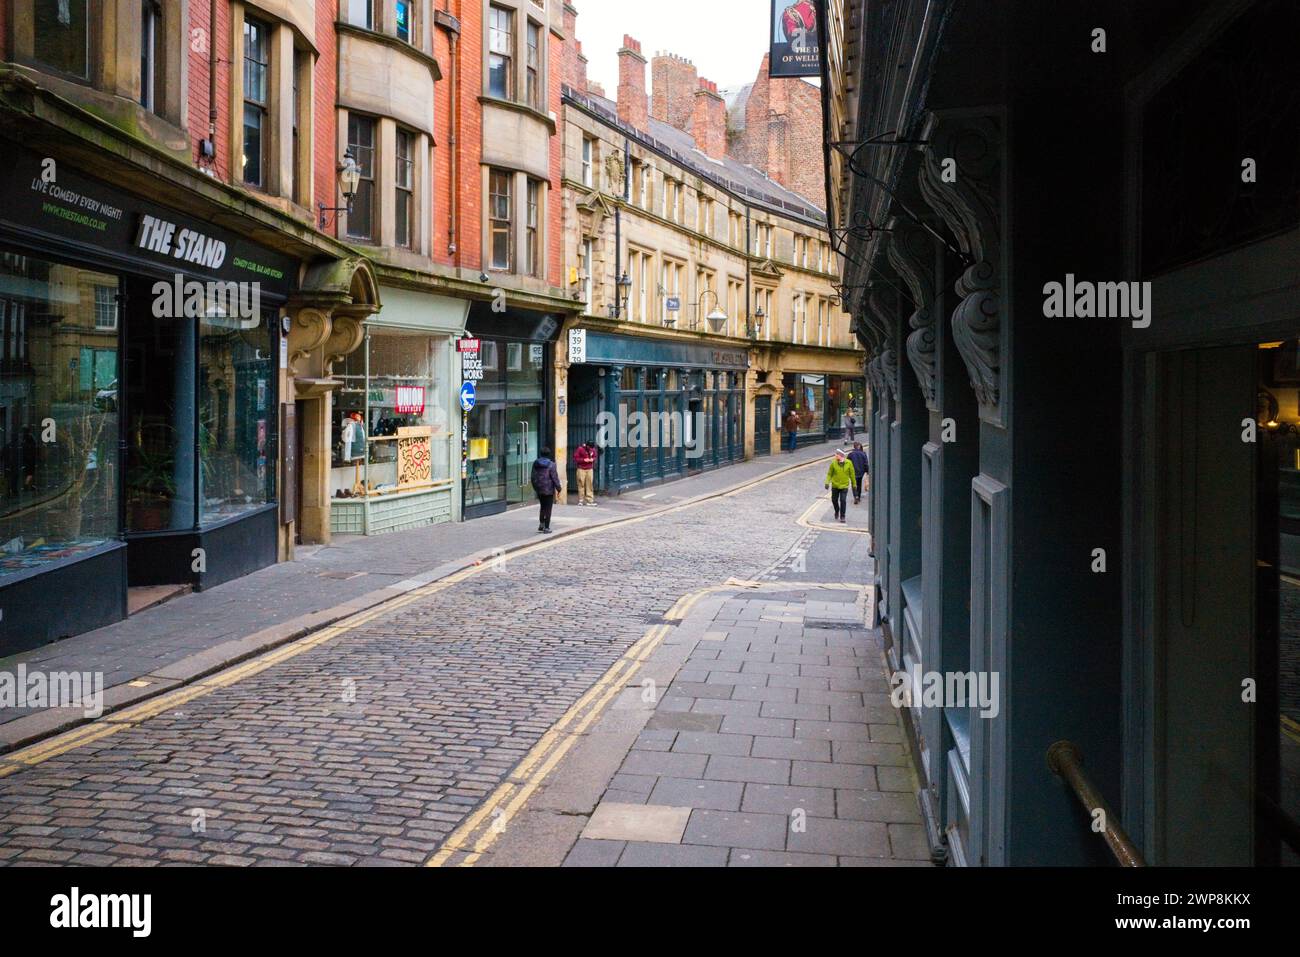 High Bridge street in the older part of Newcastle Stock Photo